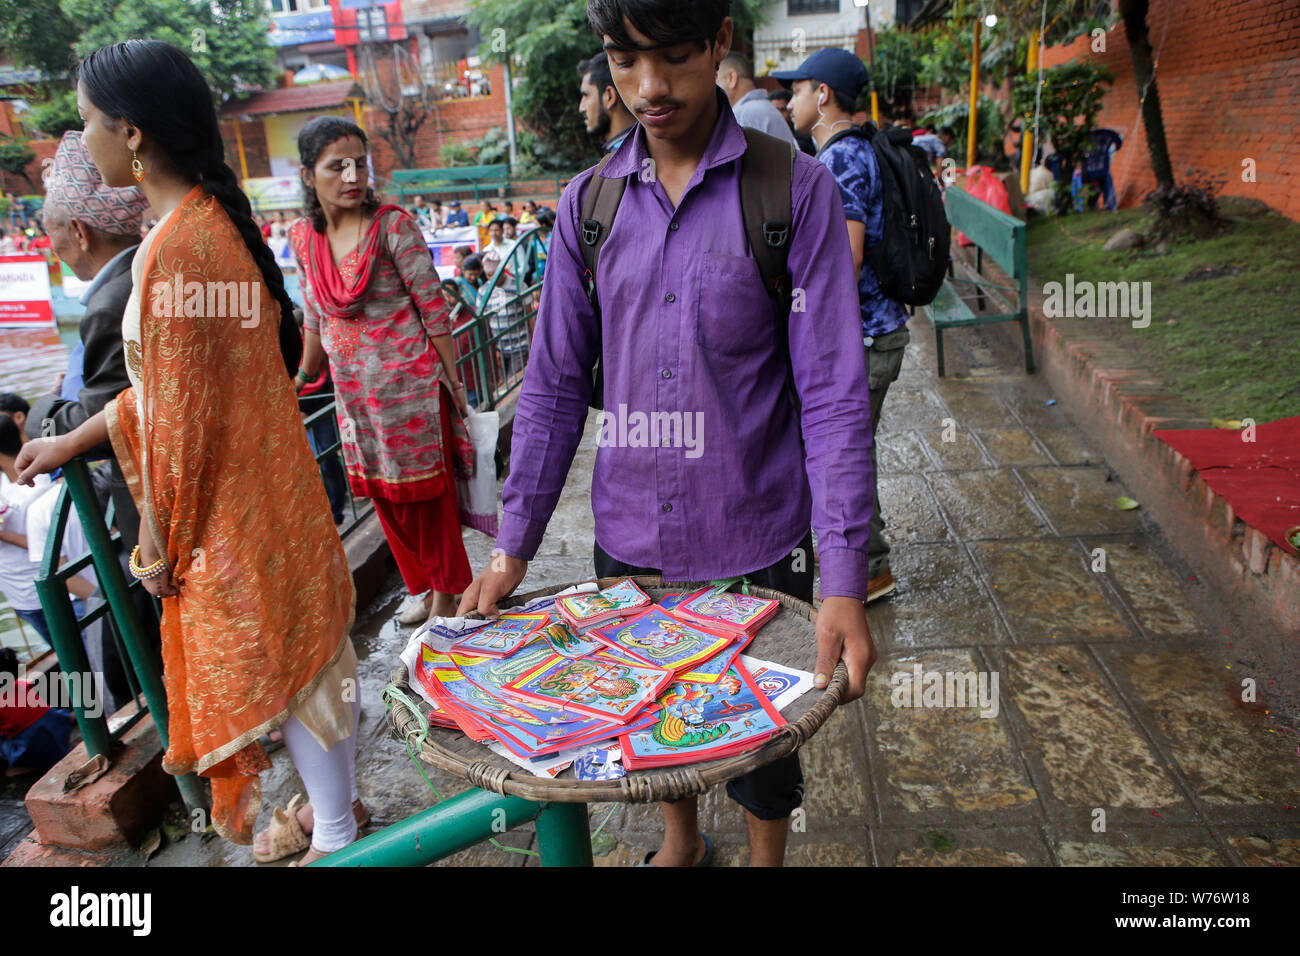 A vendor sells images of snake god during a Festival.Nag-Panchami is a festival to worship snakes or serpents, it’s observed by Hindus all over the world. The festival is observed during the monsoon with prayers and tributes to snakes. Stock Photo